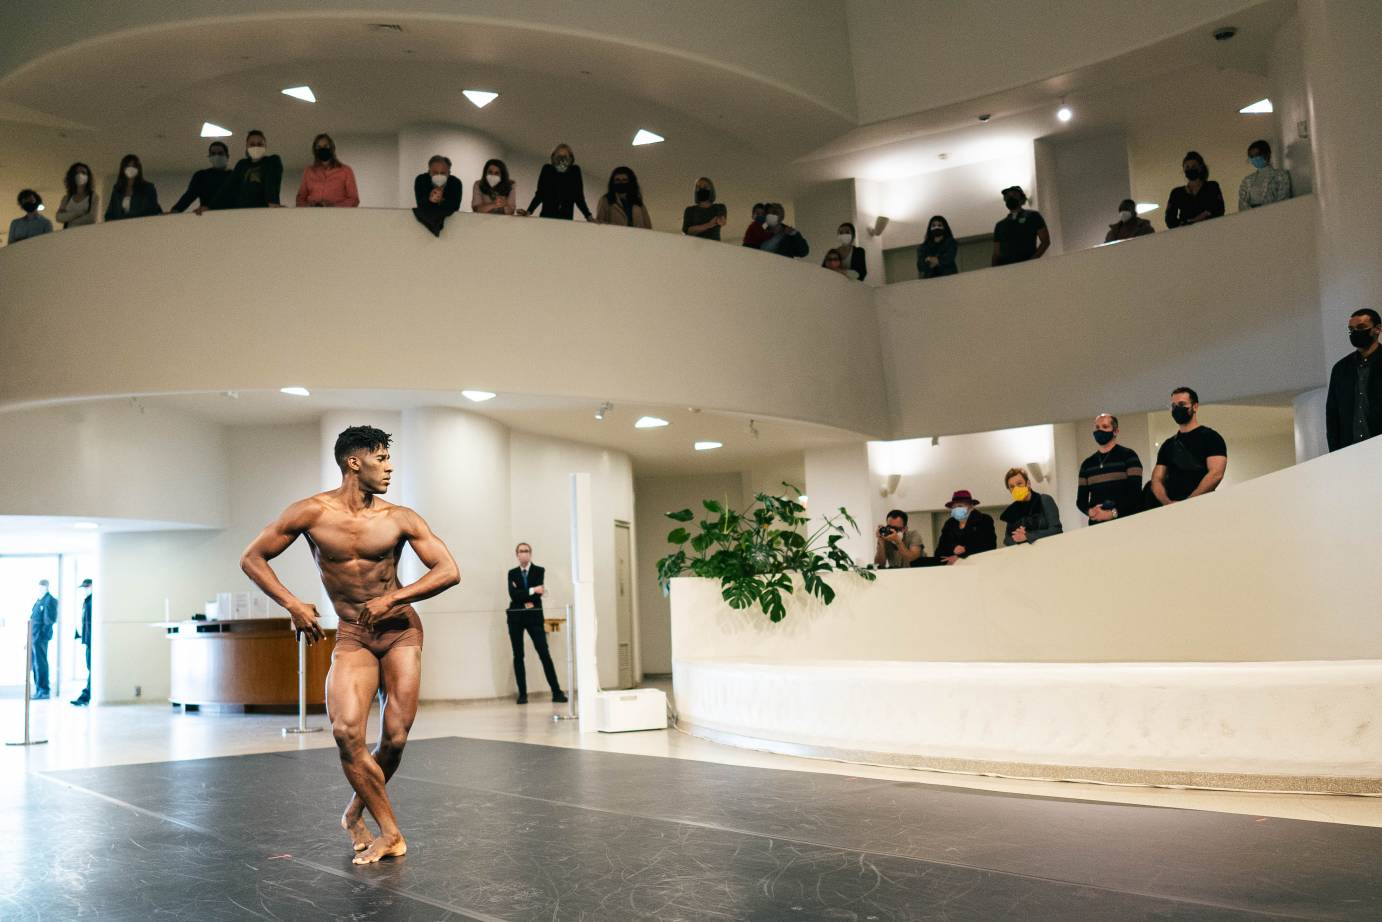 Attired in skin-toned briefs, Lloyd Knight spirals his body as he crosses his feet; people watch from above